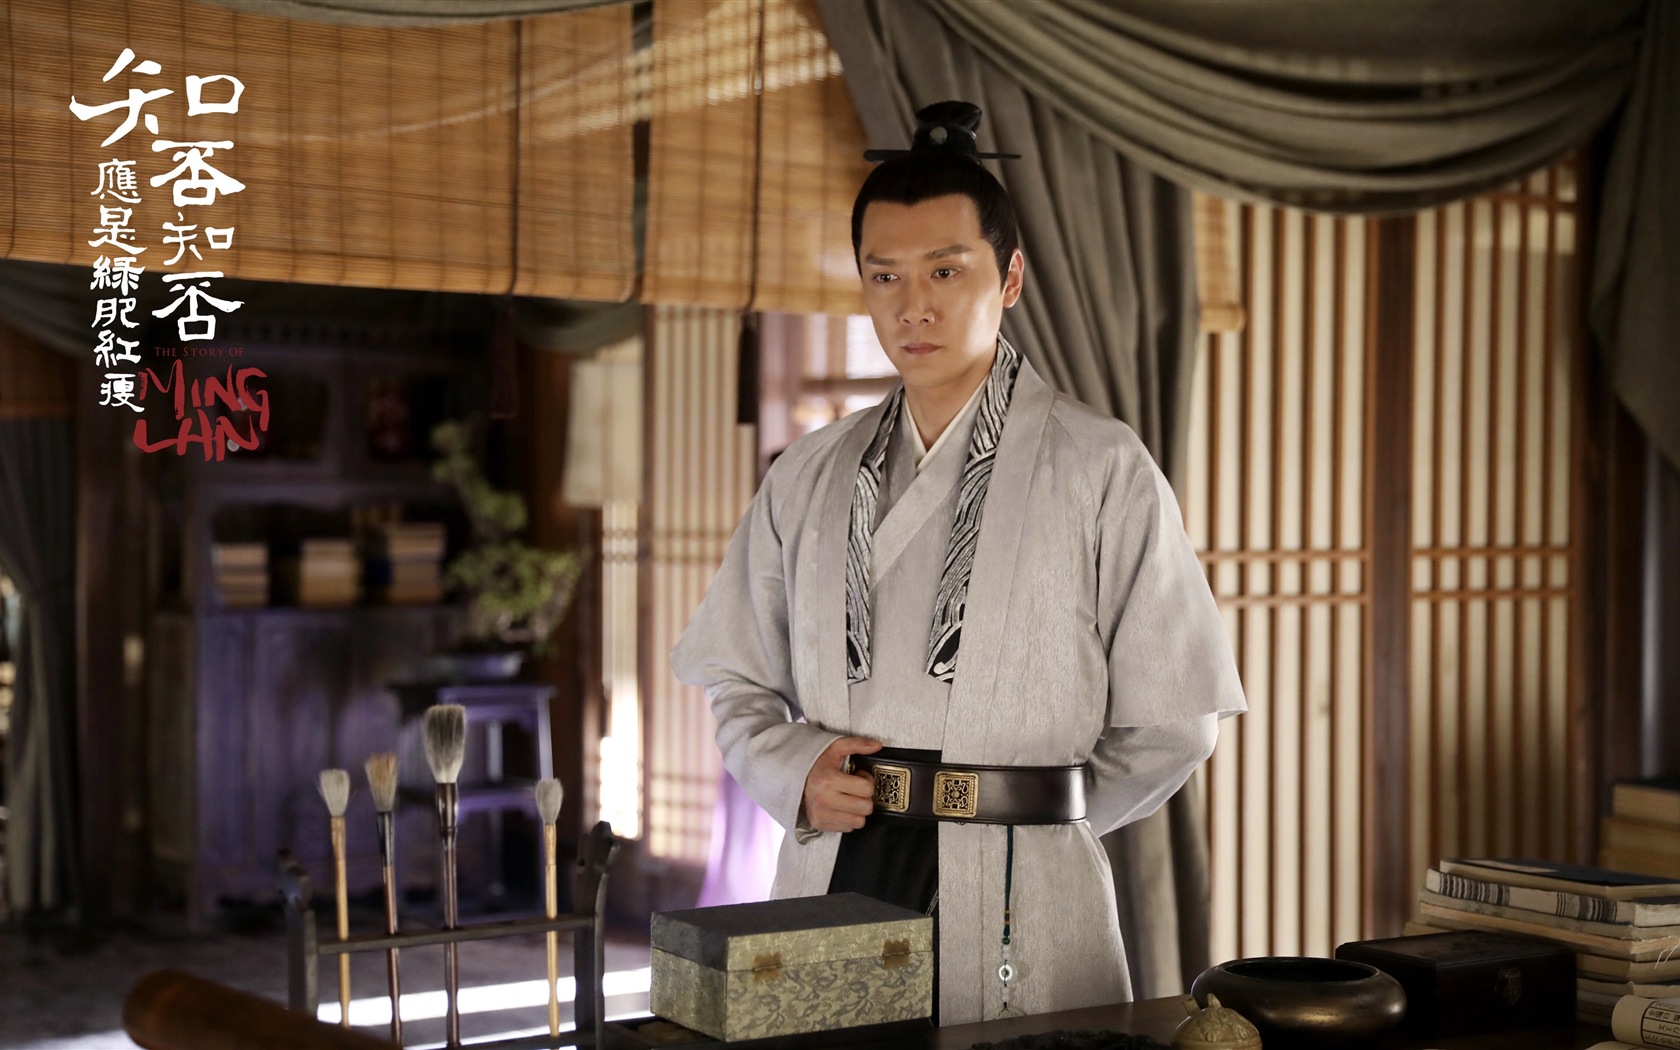 The Story Of MingLan, TV series HD wallpapers #49 - 1680x1050